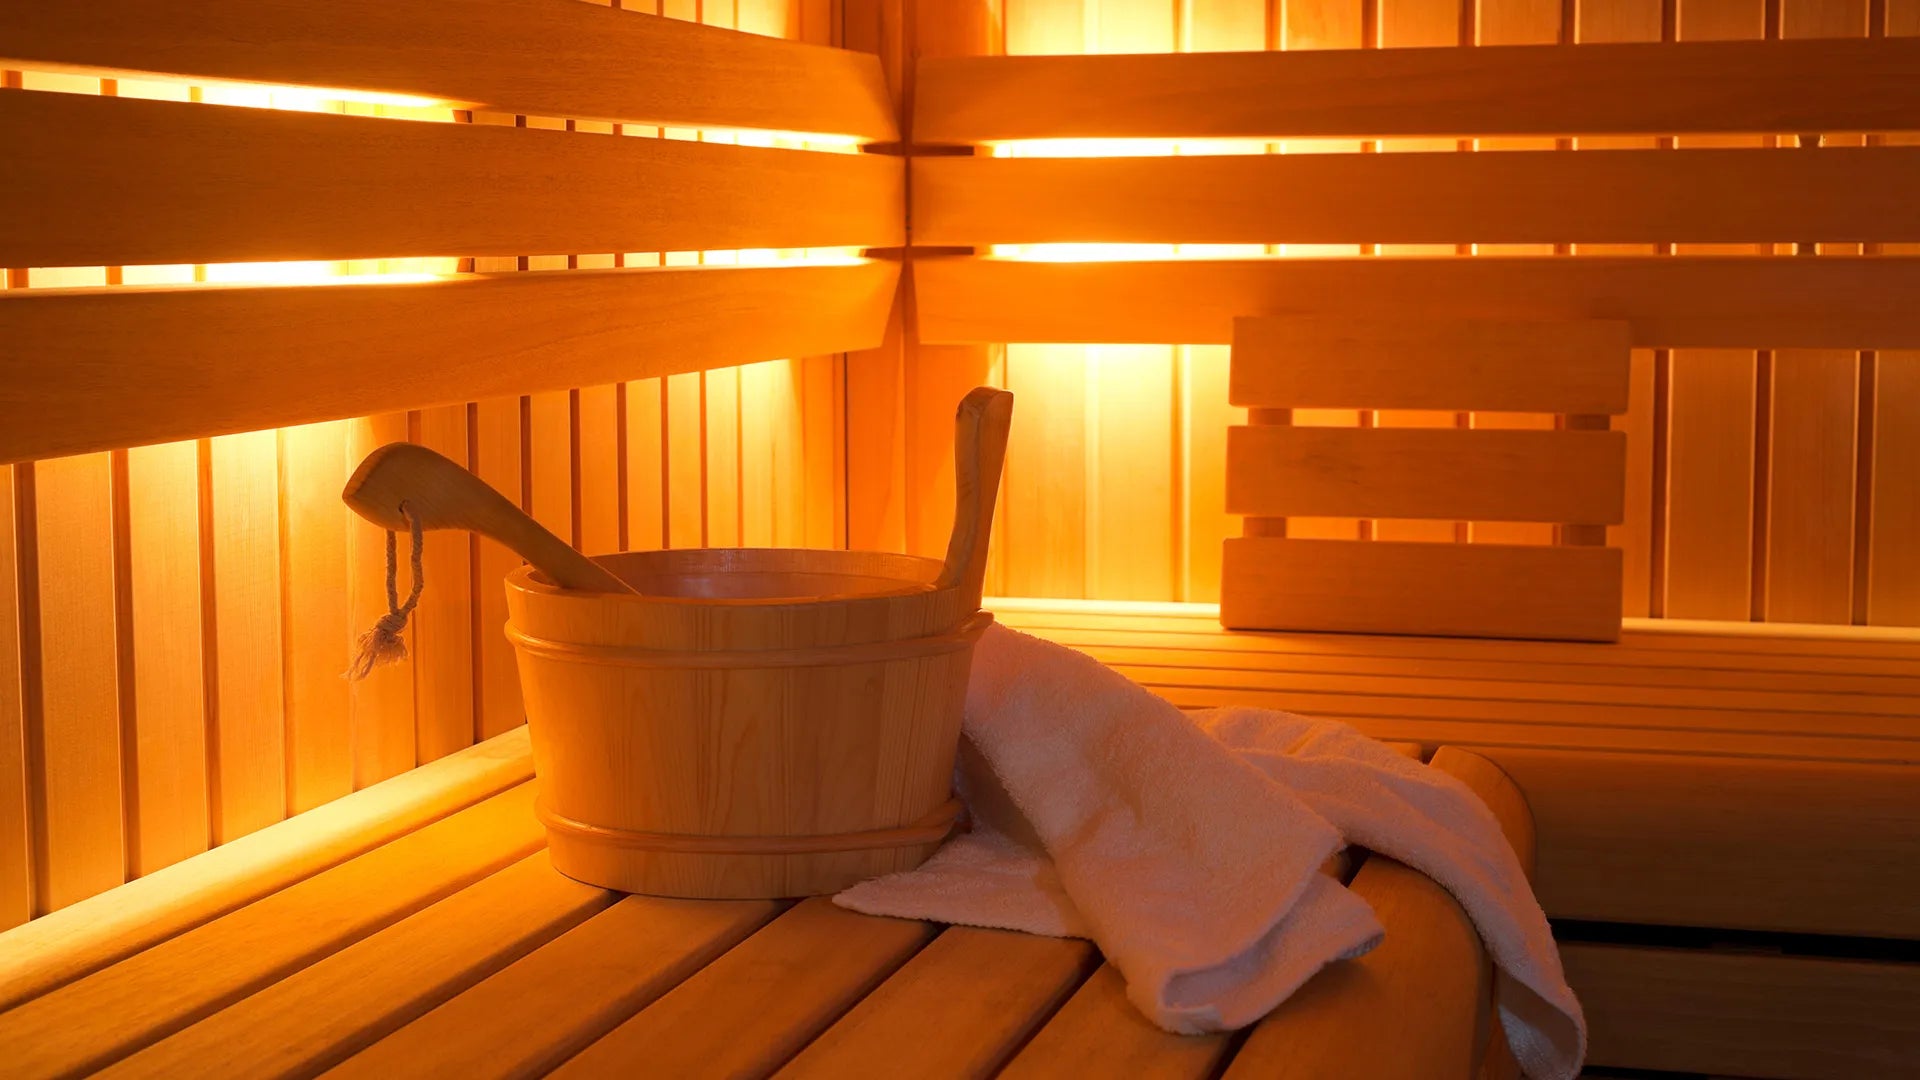 Health Benefits of Sauna: More than just relaxation